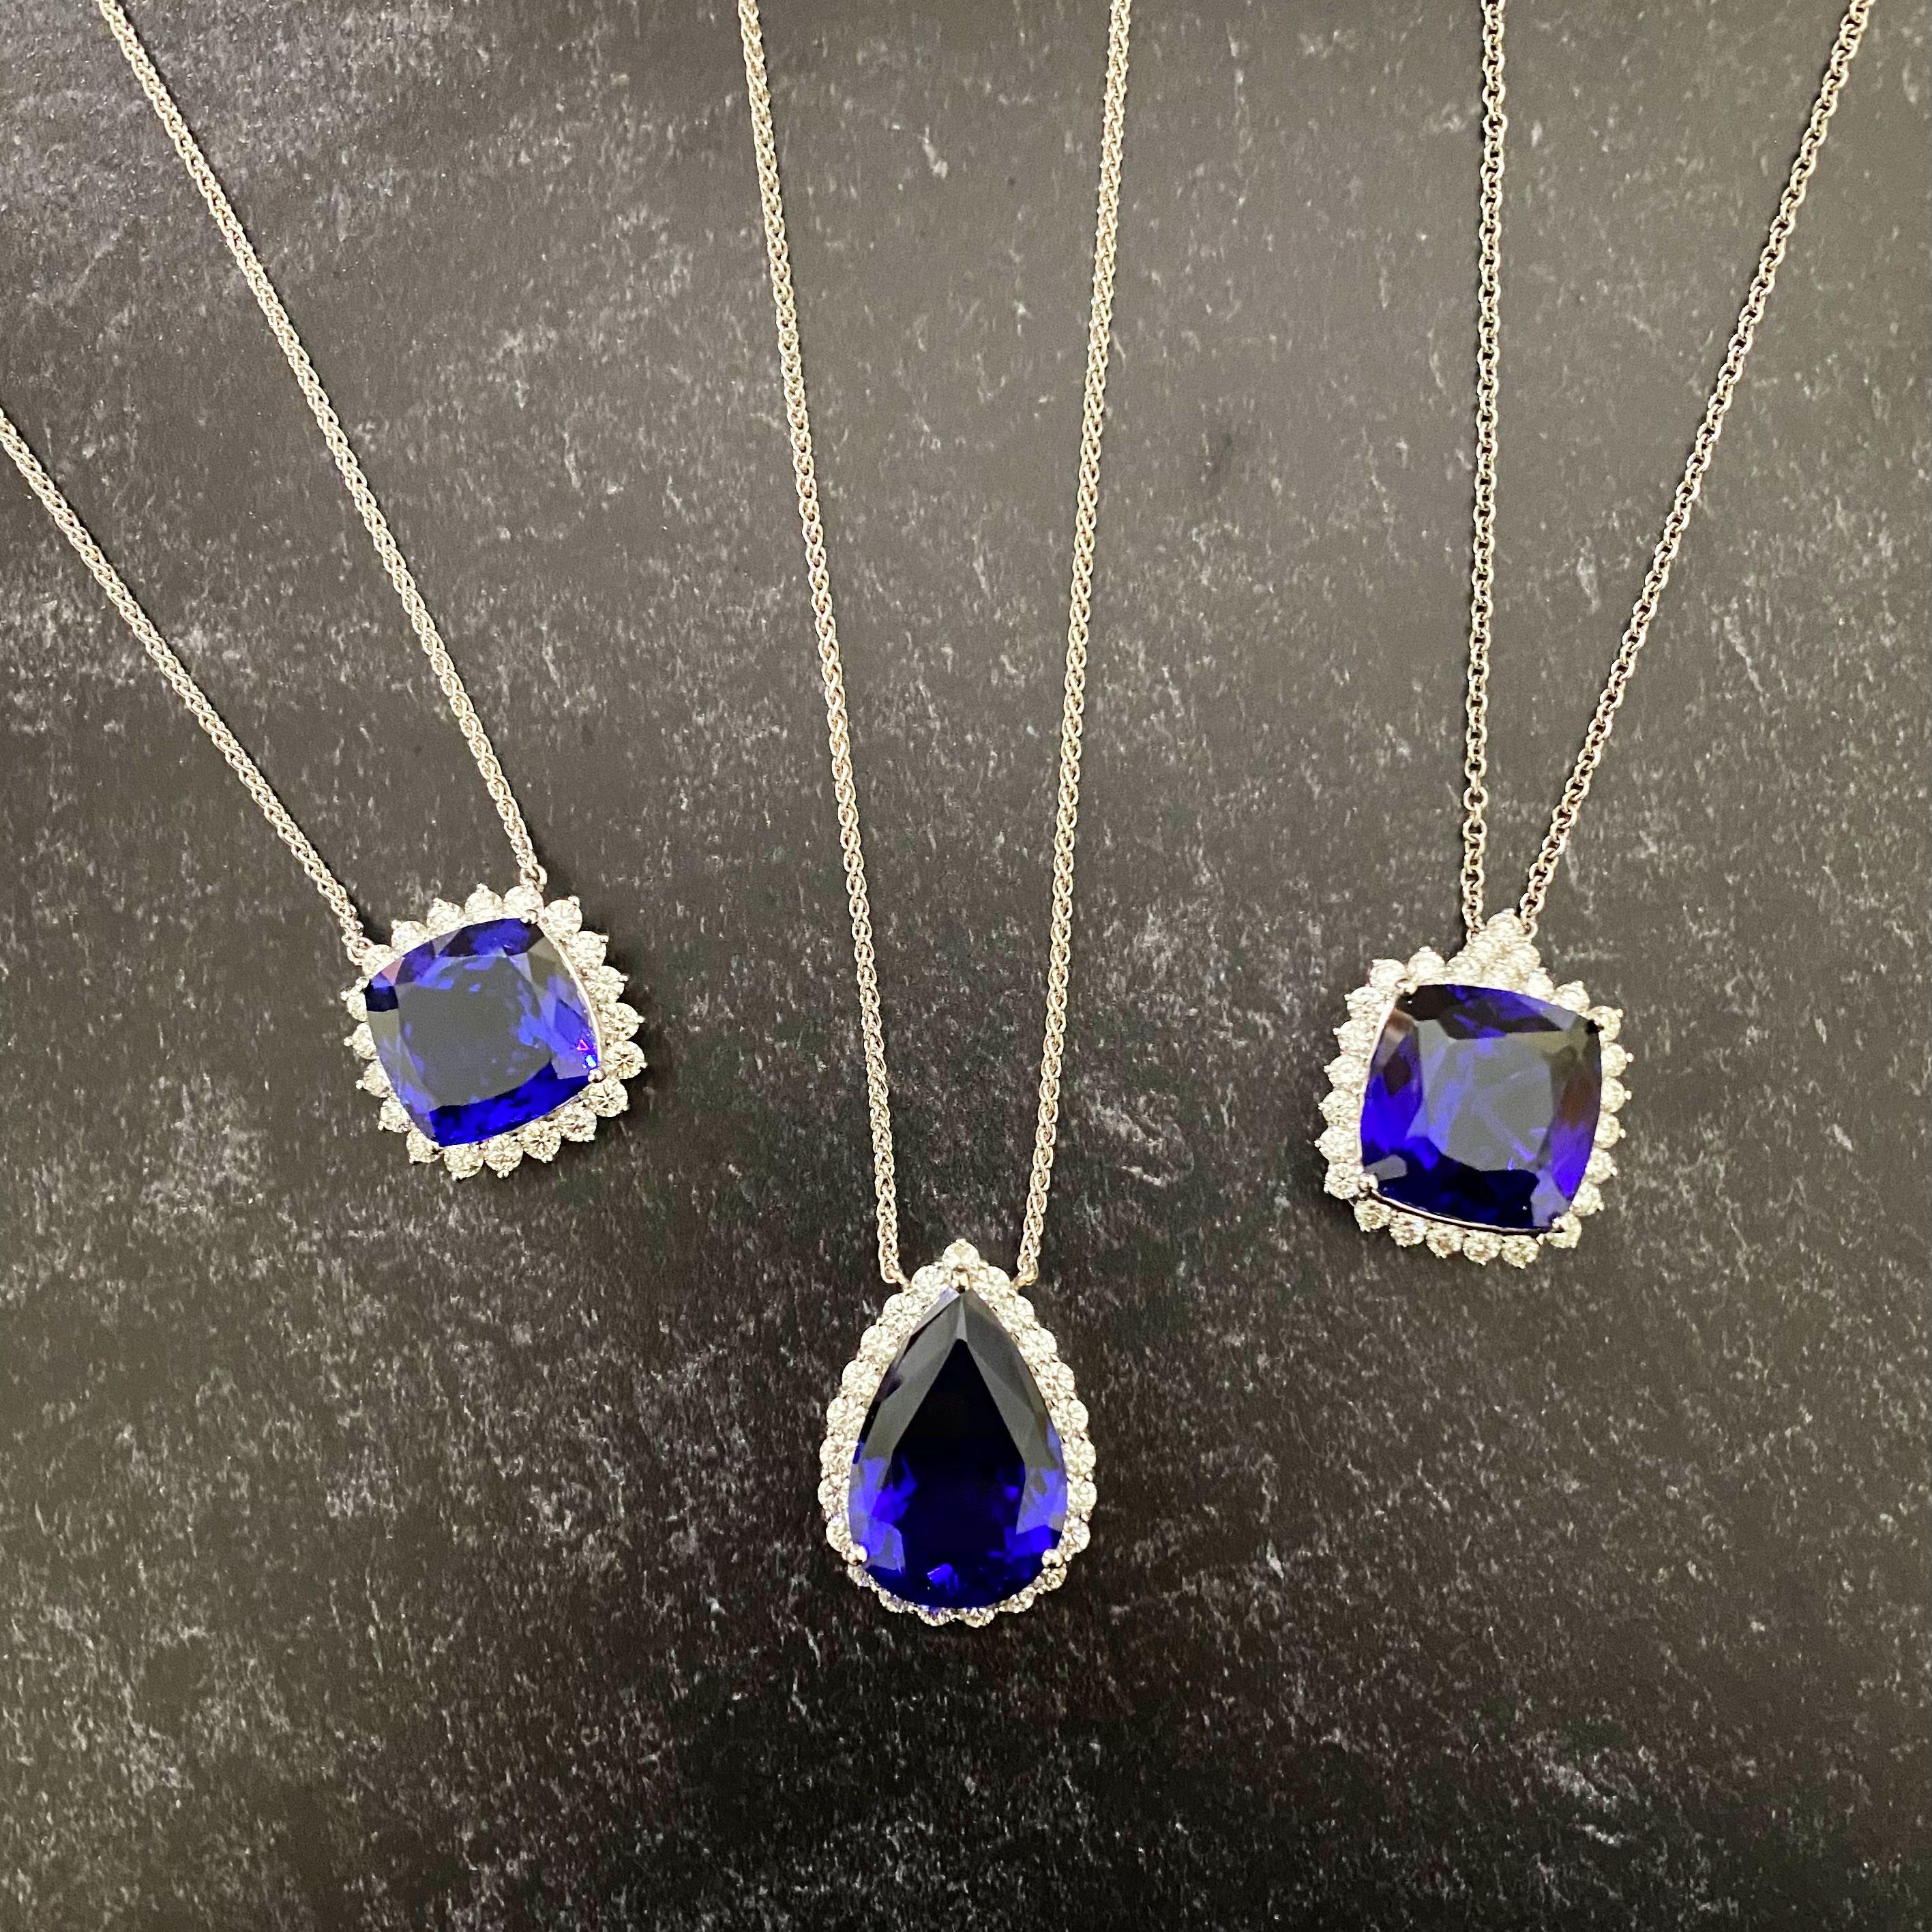 18k White Gold
Center Stone: 1 Pear Shaped Tanzanite at 28.78 Carats- Measuring 27 x 18 mm
Diamonds: 24 Brilliant White Round Diamonds at 2.70 carats - Color: HI - Clarity: SI

Fine one-of-a-kind craftsmanship meets incredible quality in this